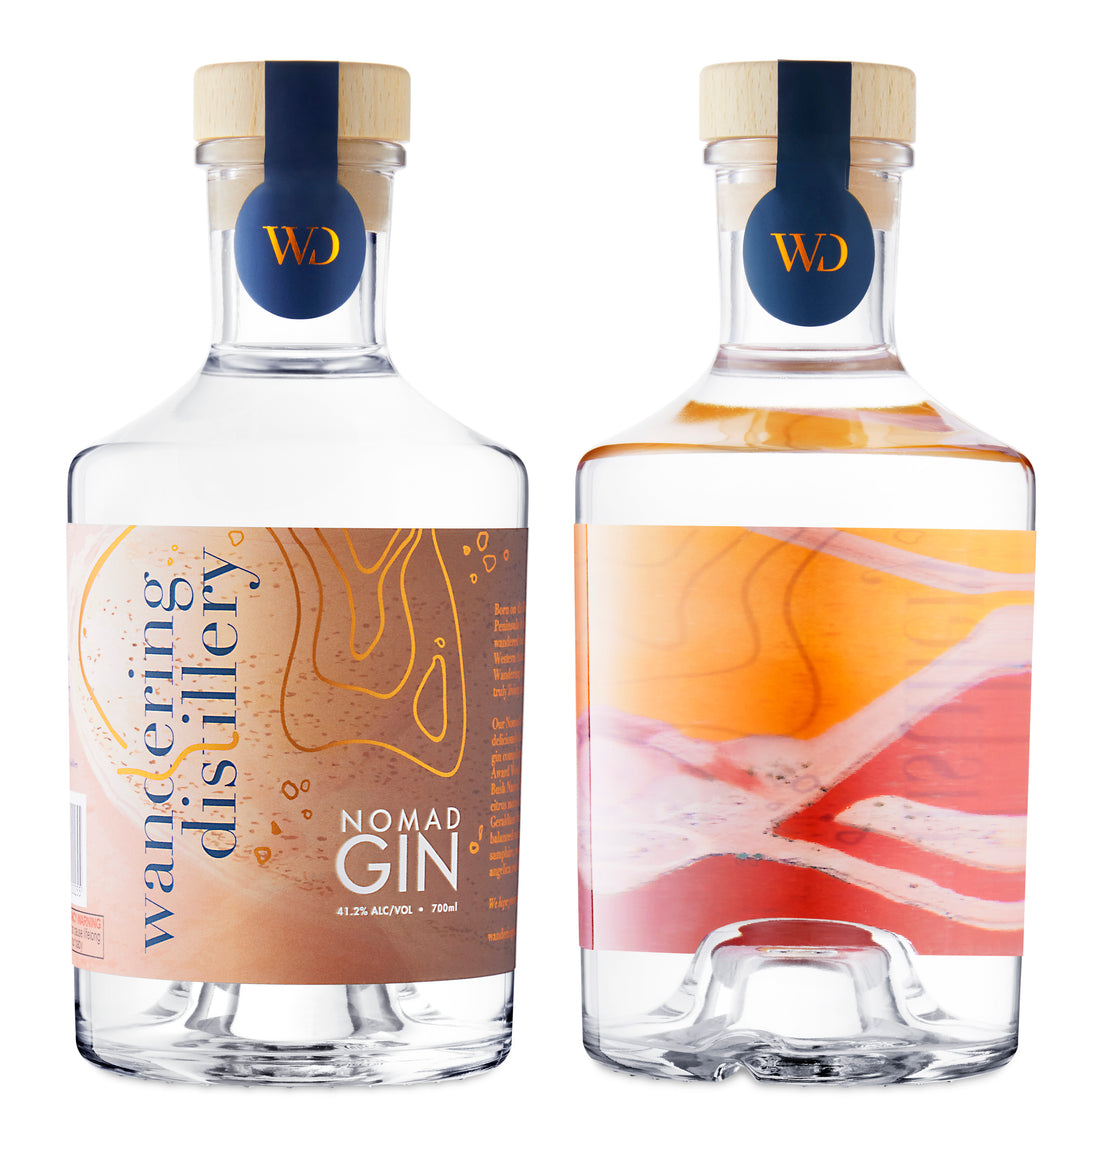 Nomad Gin Gold Medal winning Gin from Wandering Distillery. Front and back of bottle on a white background